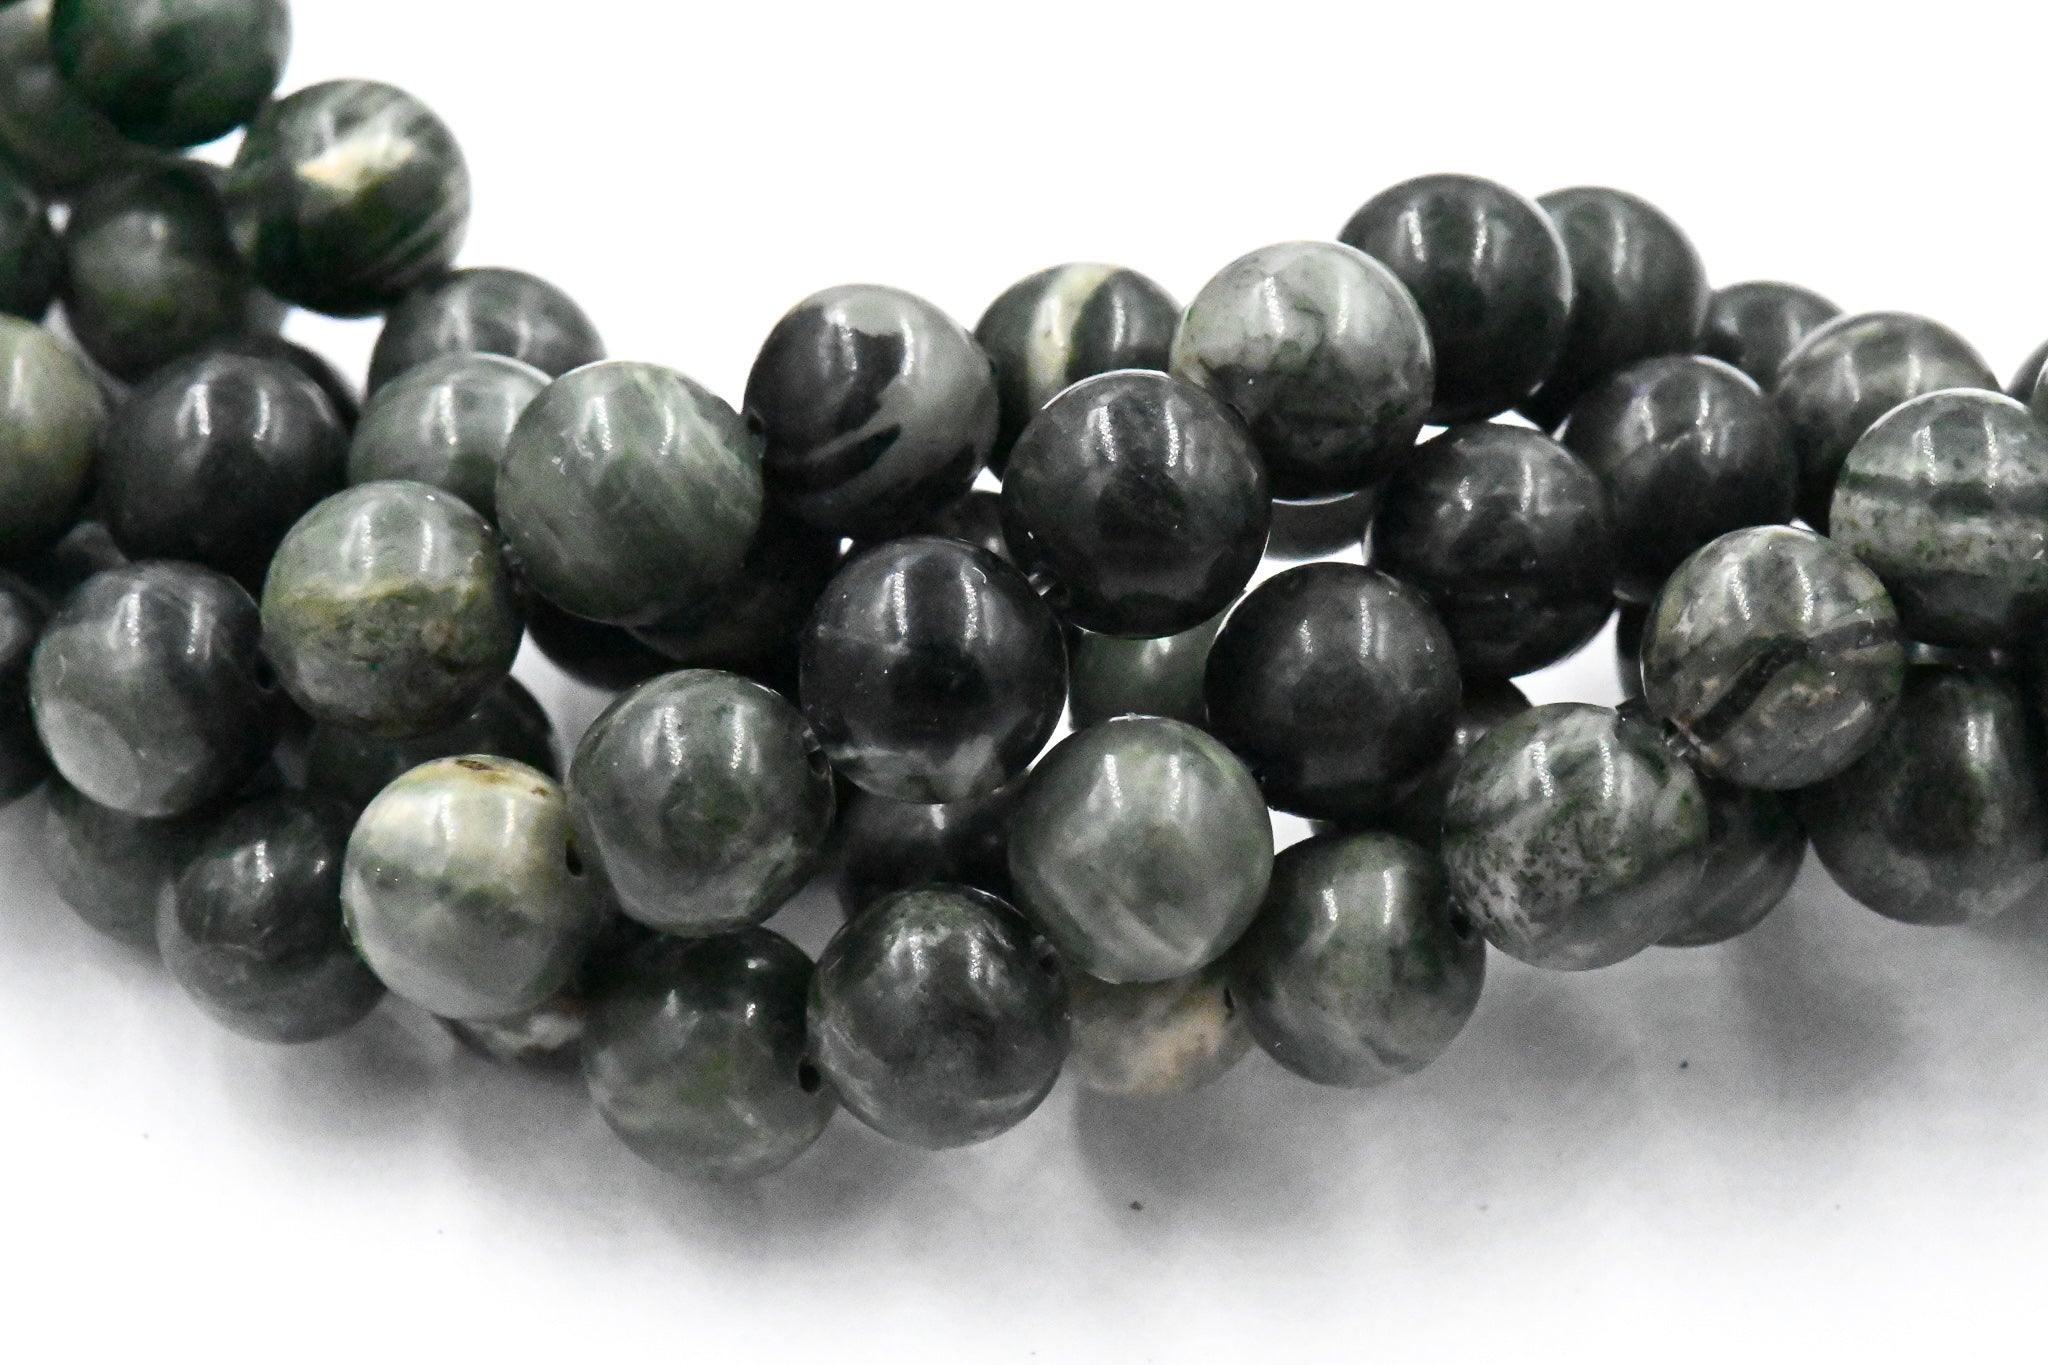 Green Wood Lace Stone Beads, 8mm